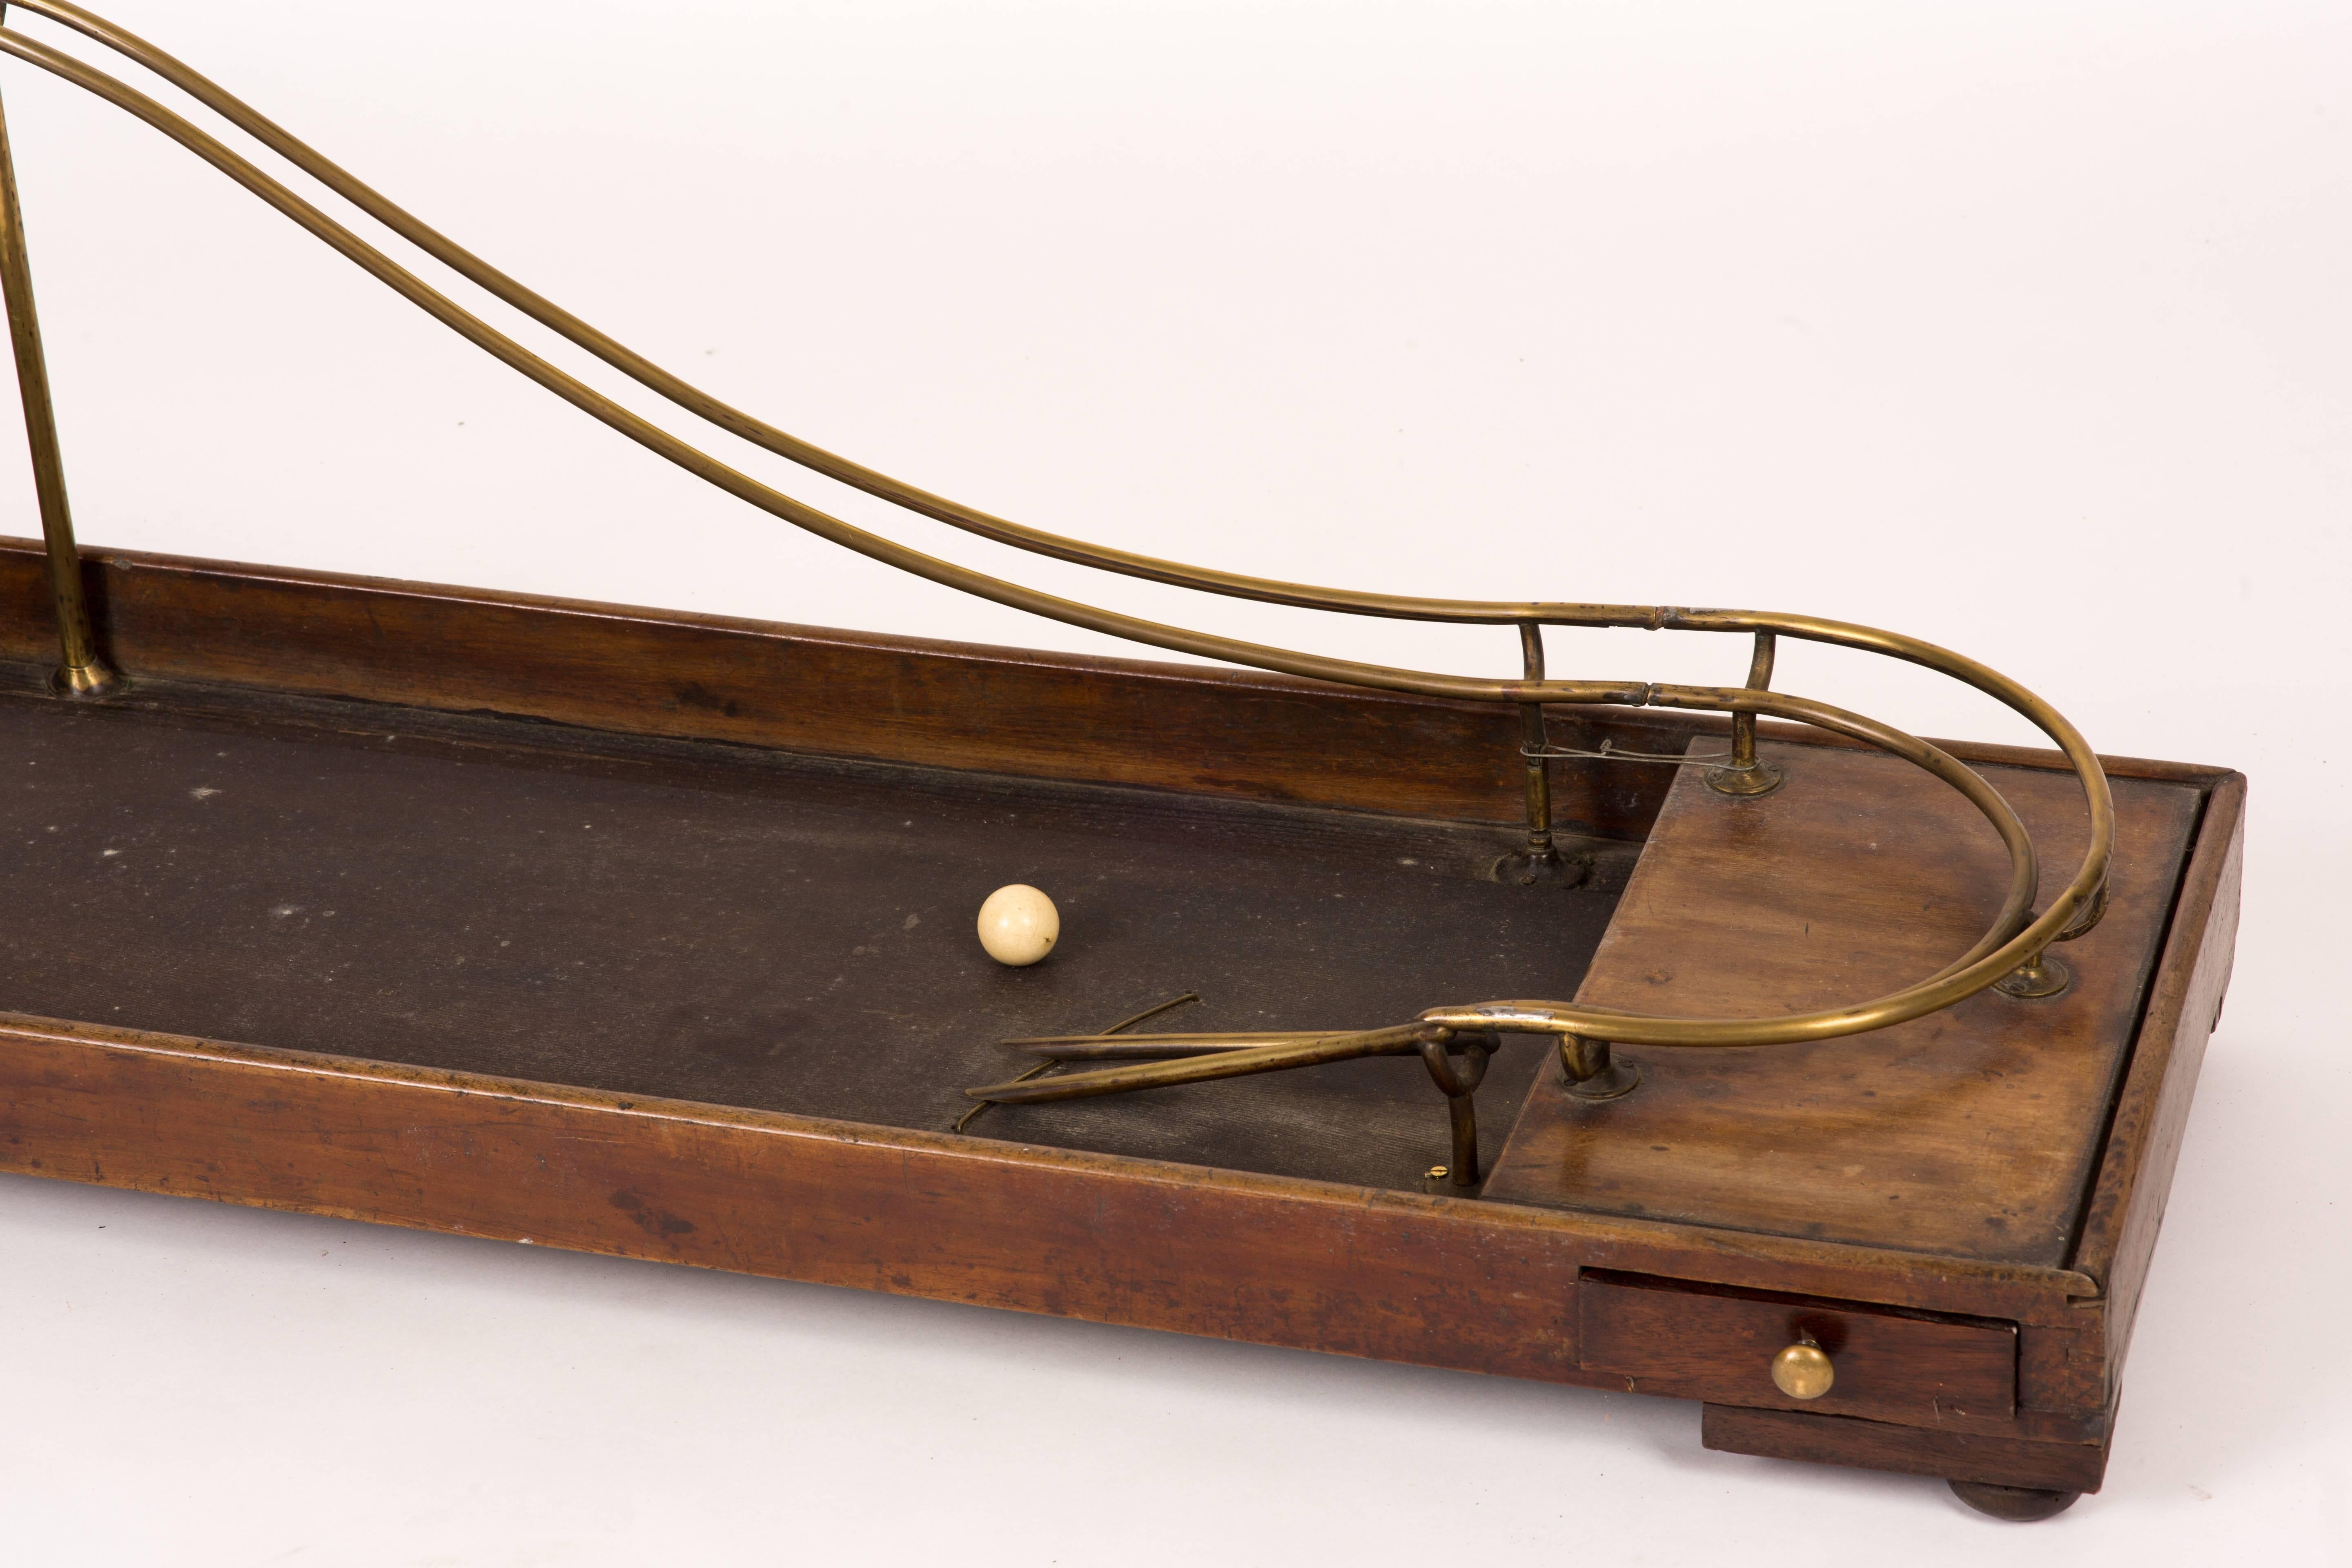 A 19th century wood and brass skittle game with separate ball and wood pins.